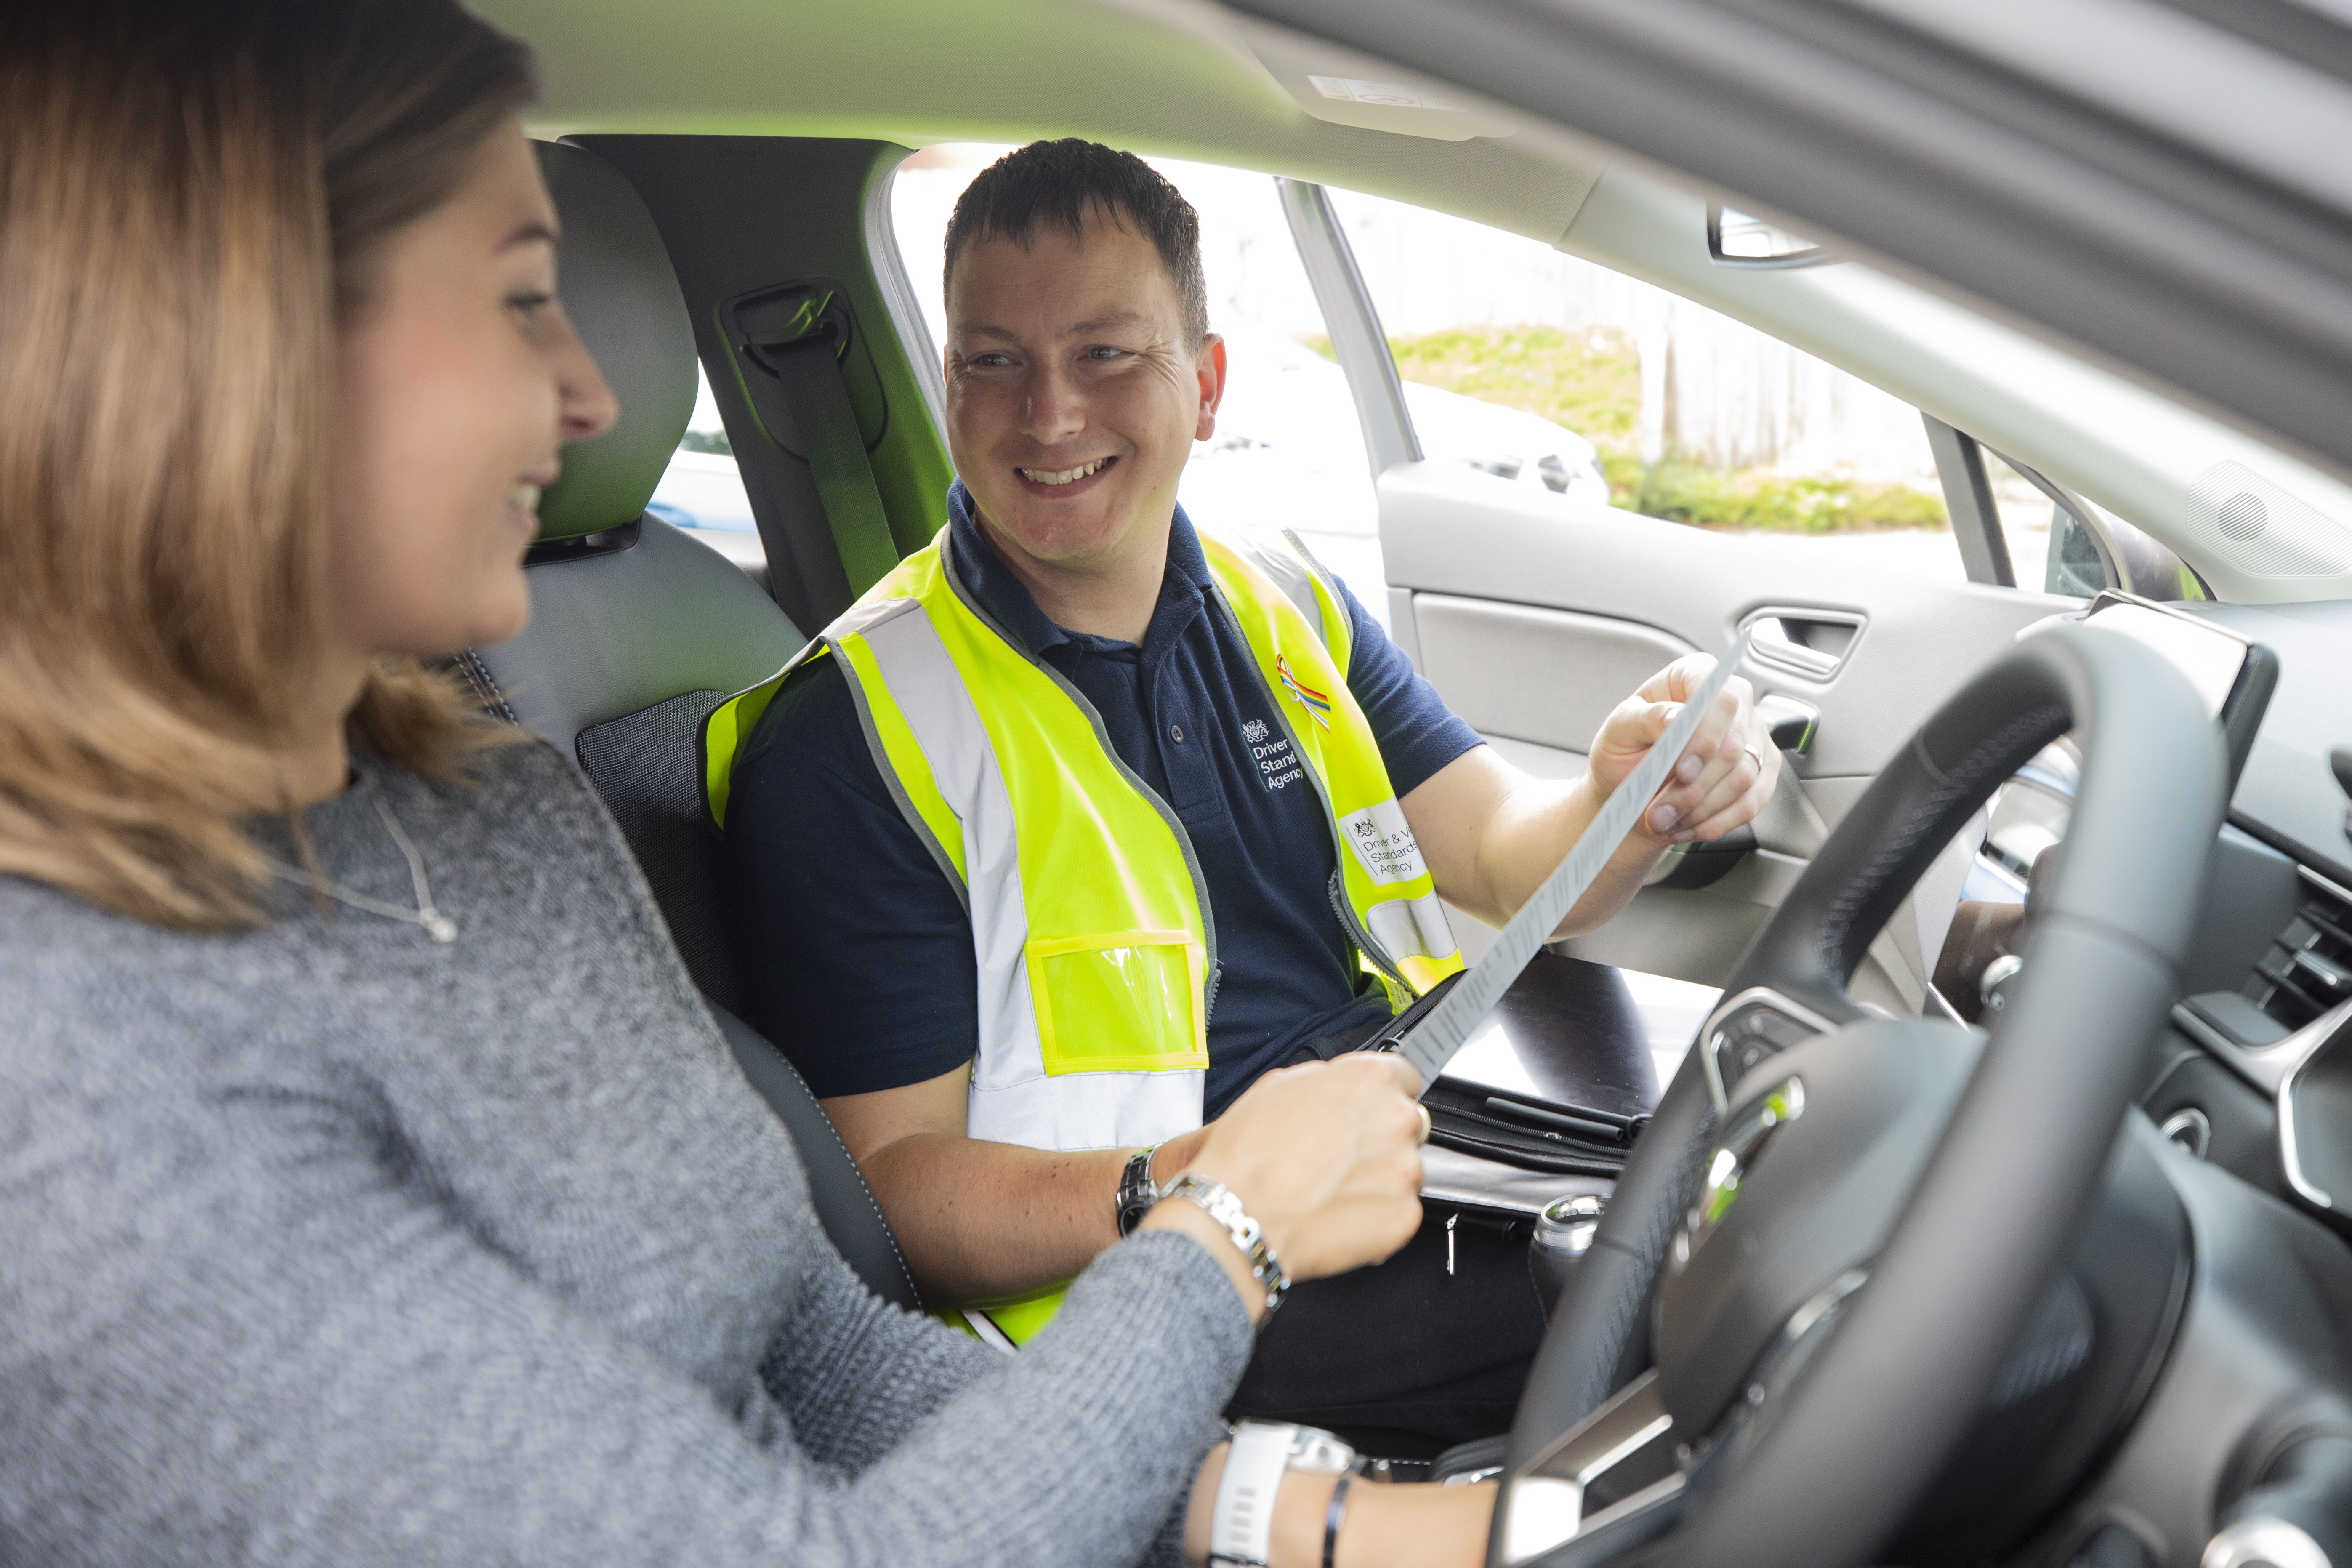 A driving examiner handing a test candidate their physical pass certificate